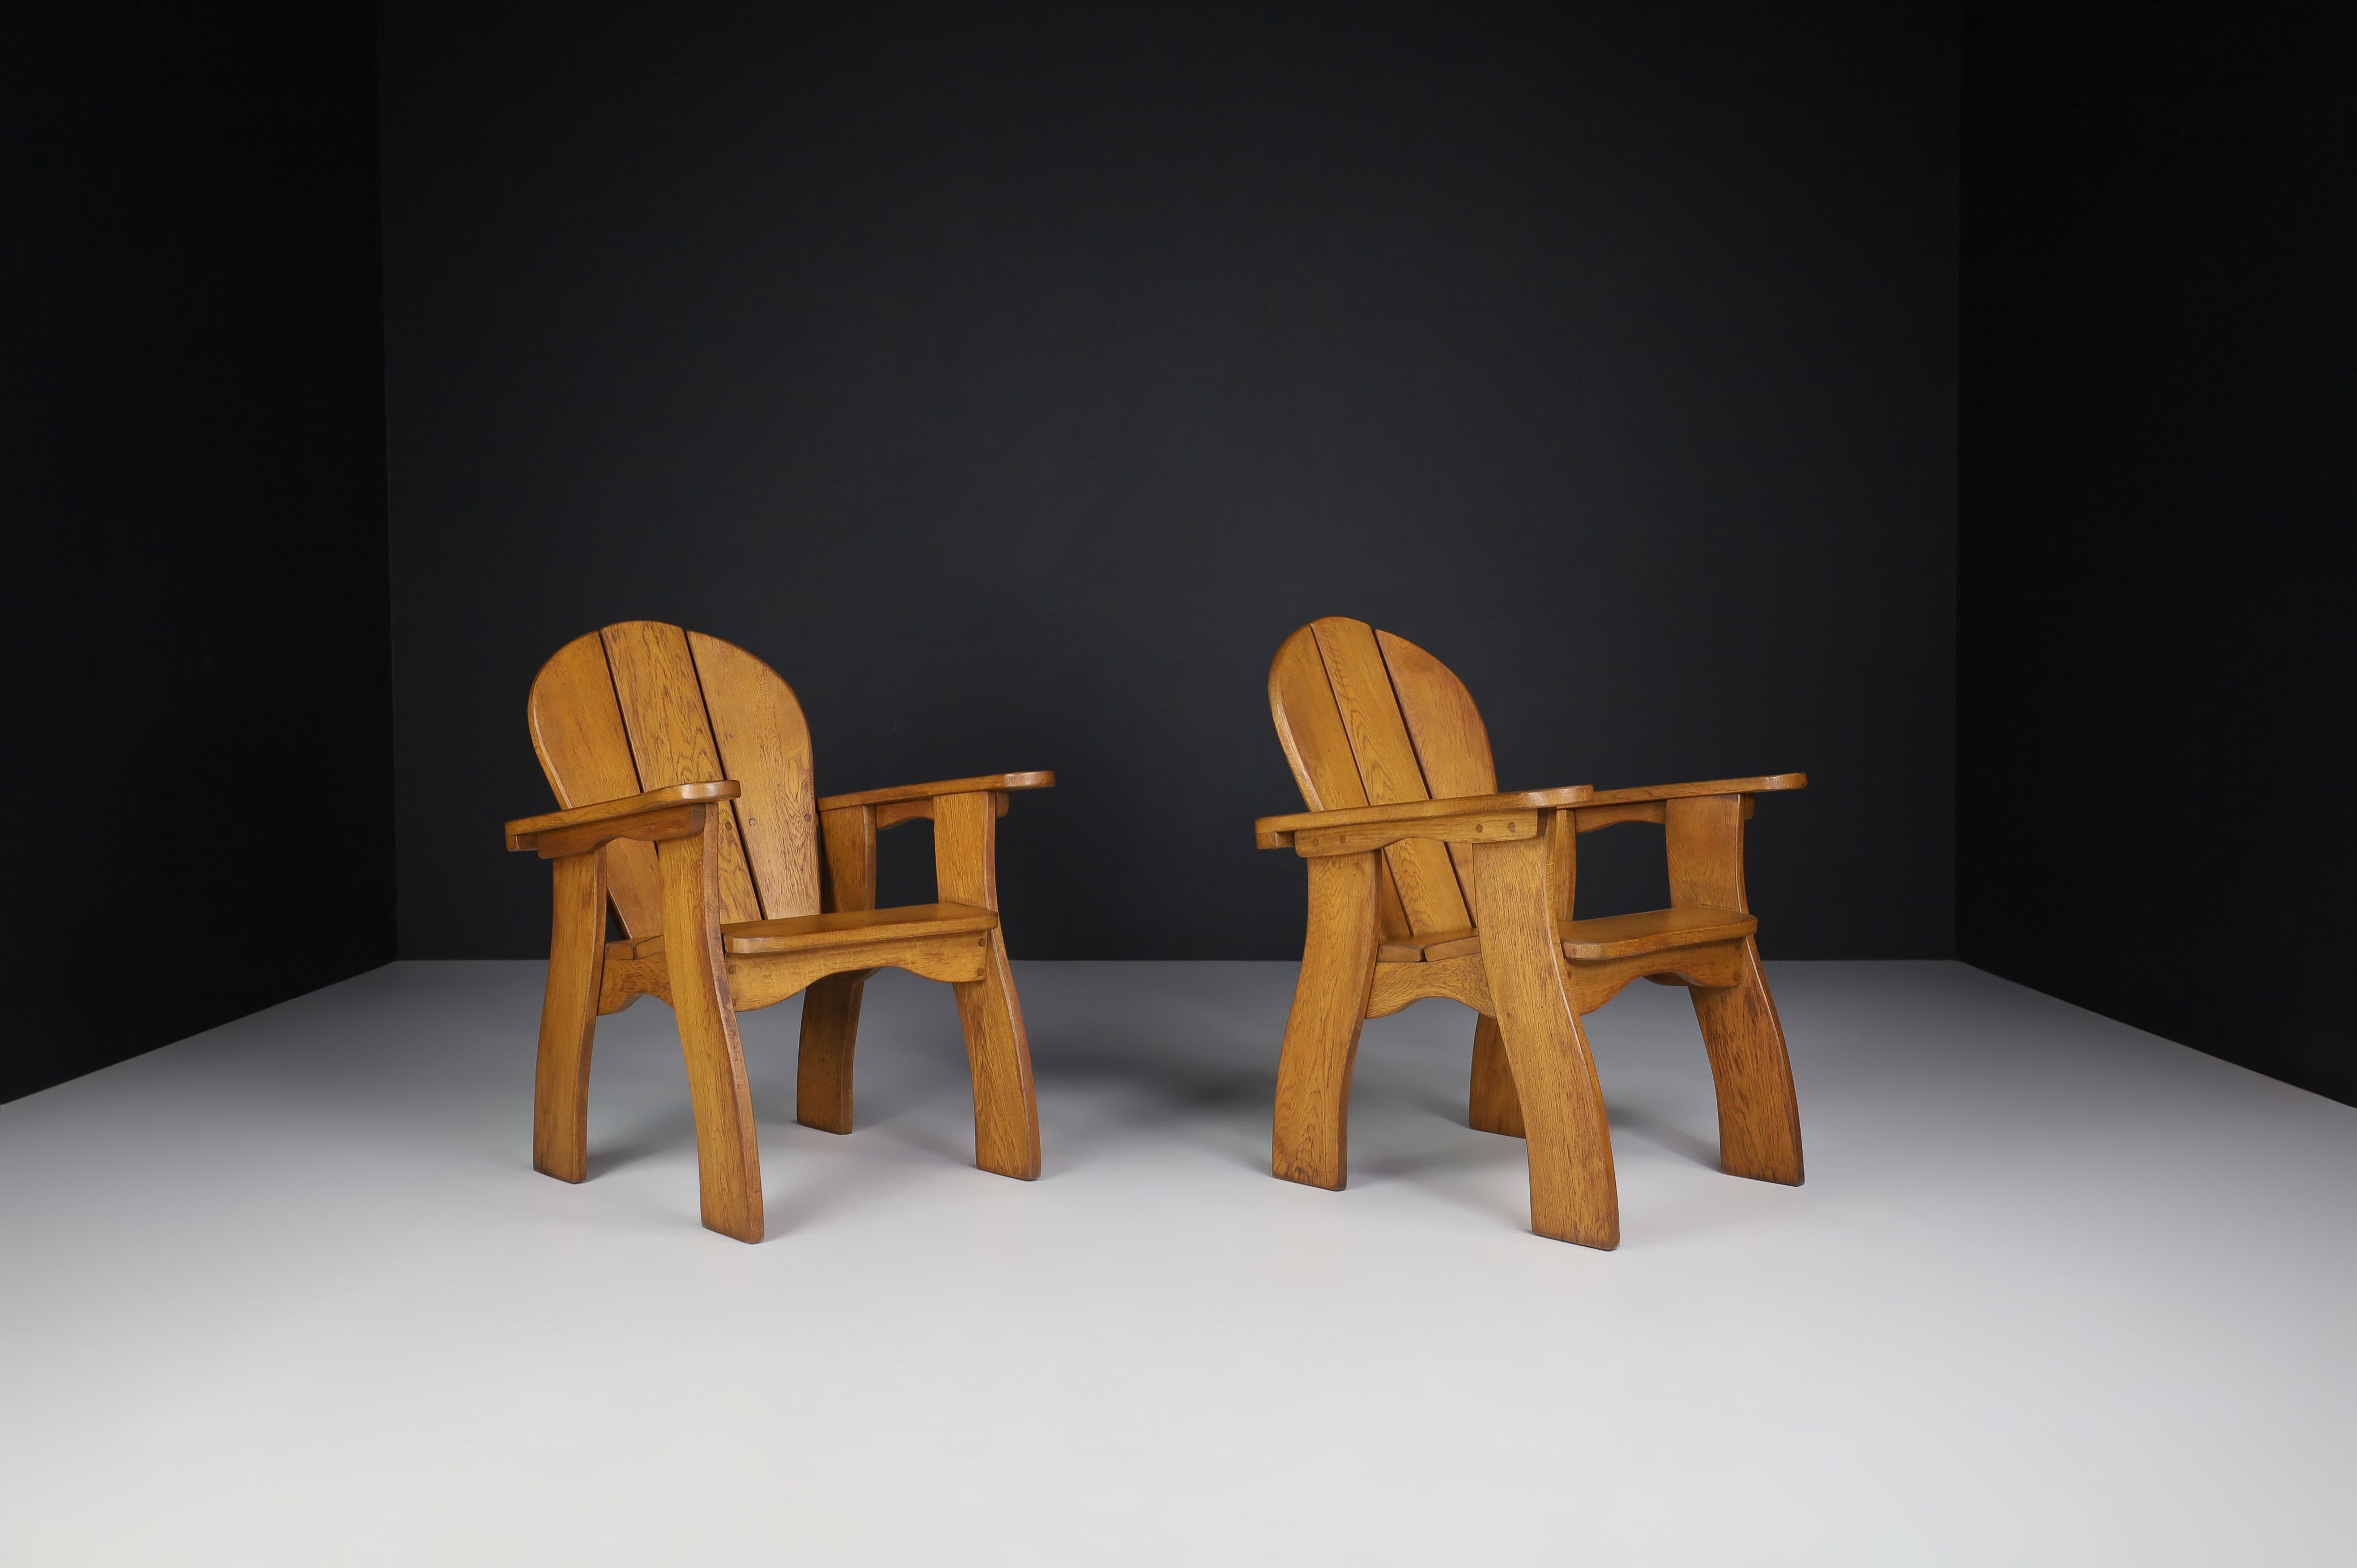 French Sculptural Armchairs in Oak, France, 1960s For Sale